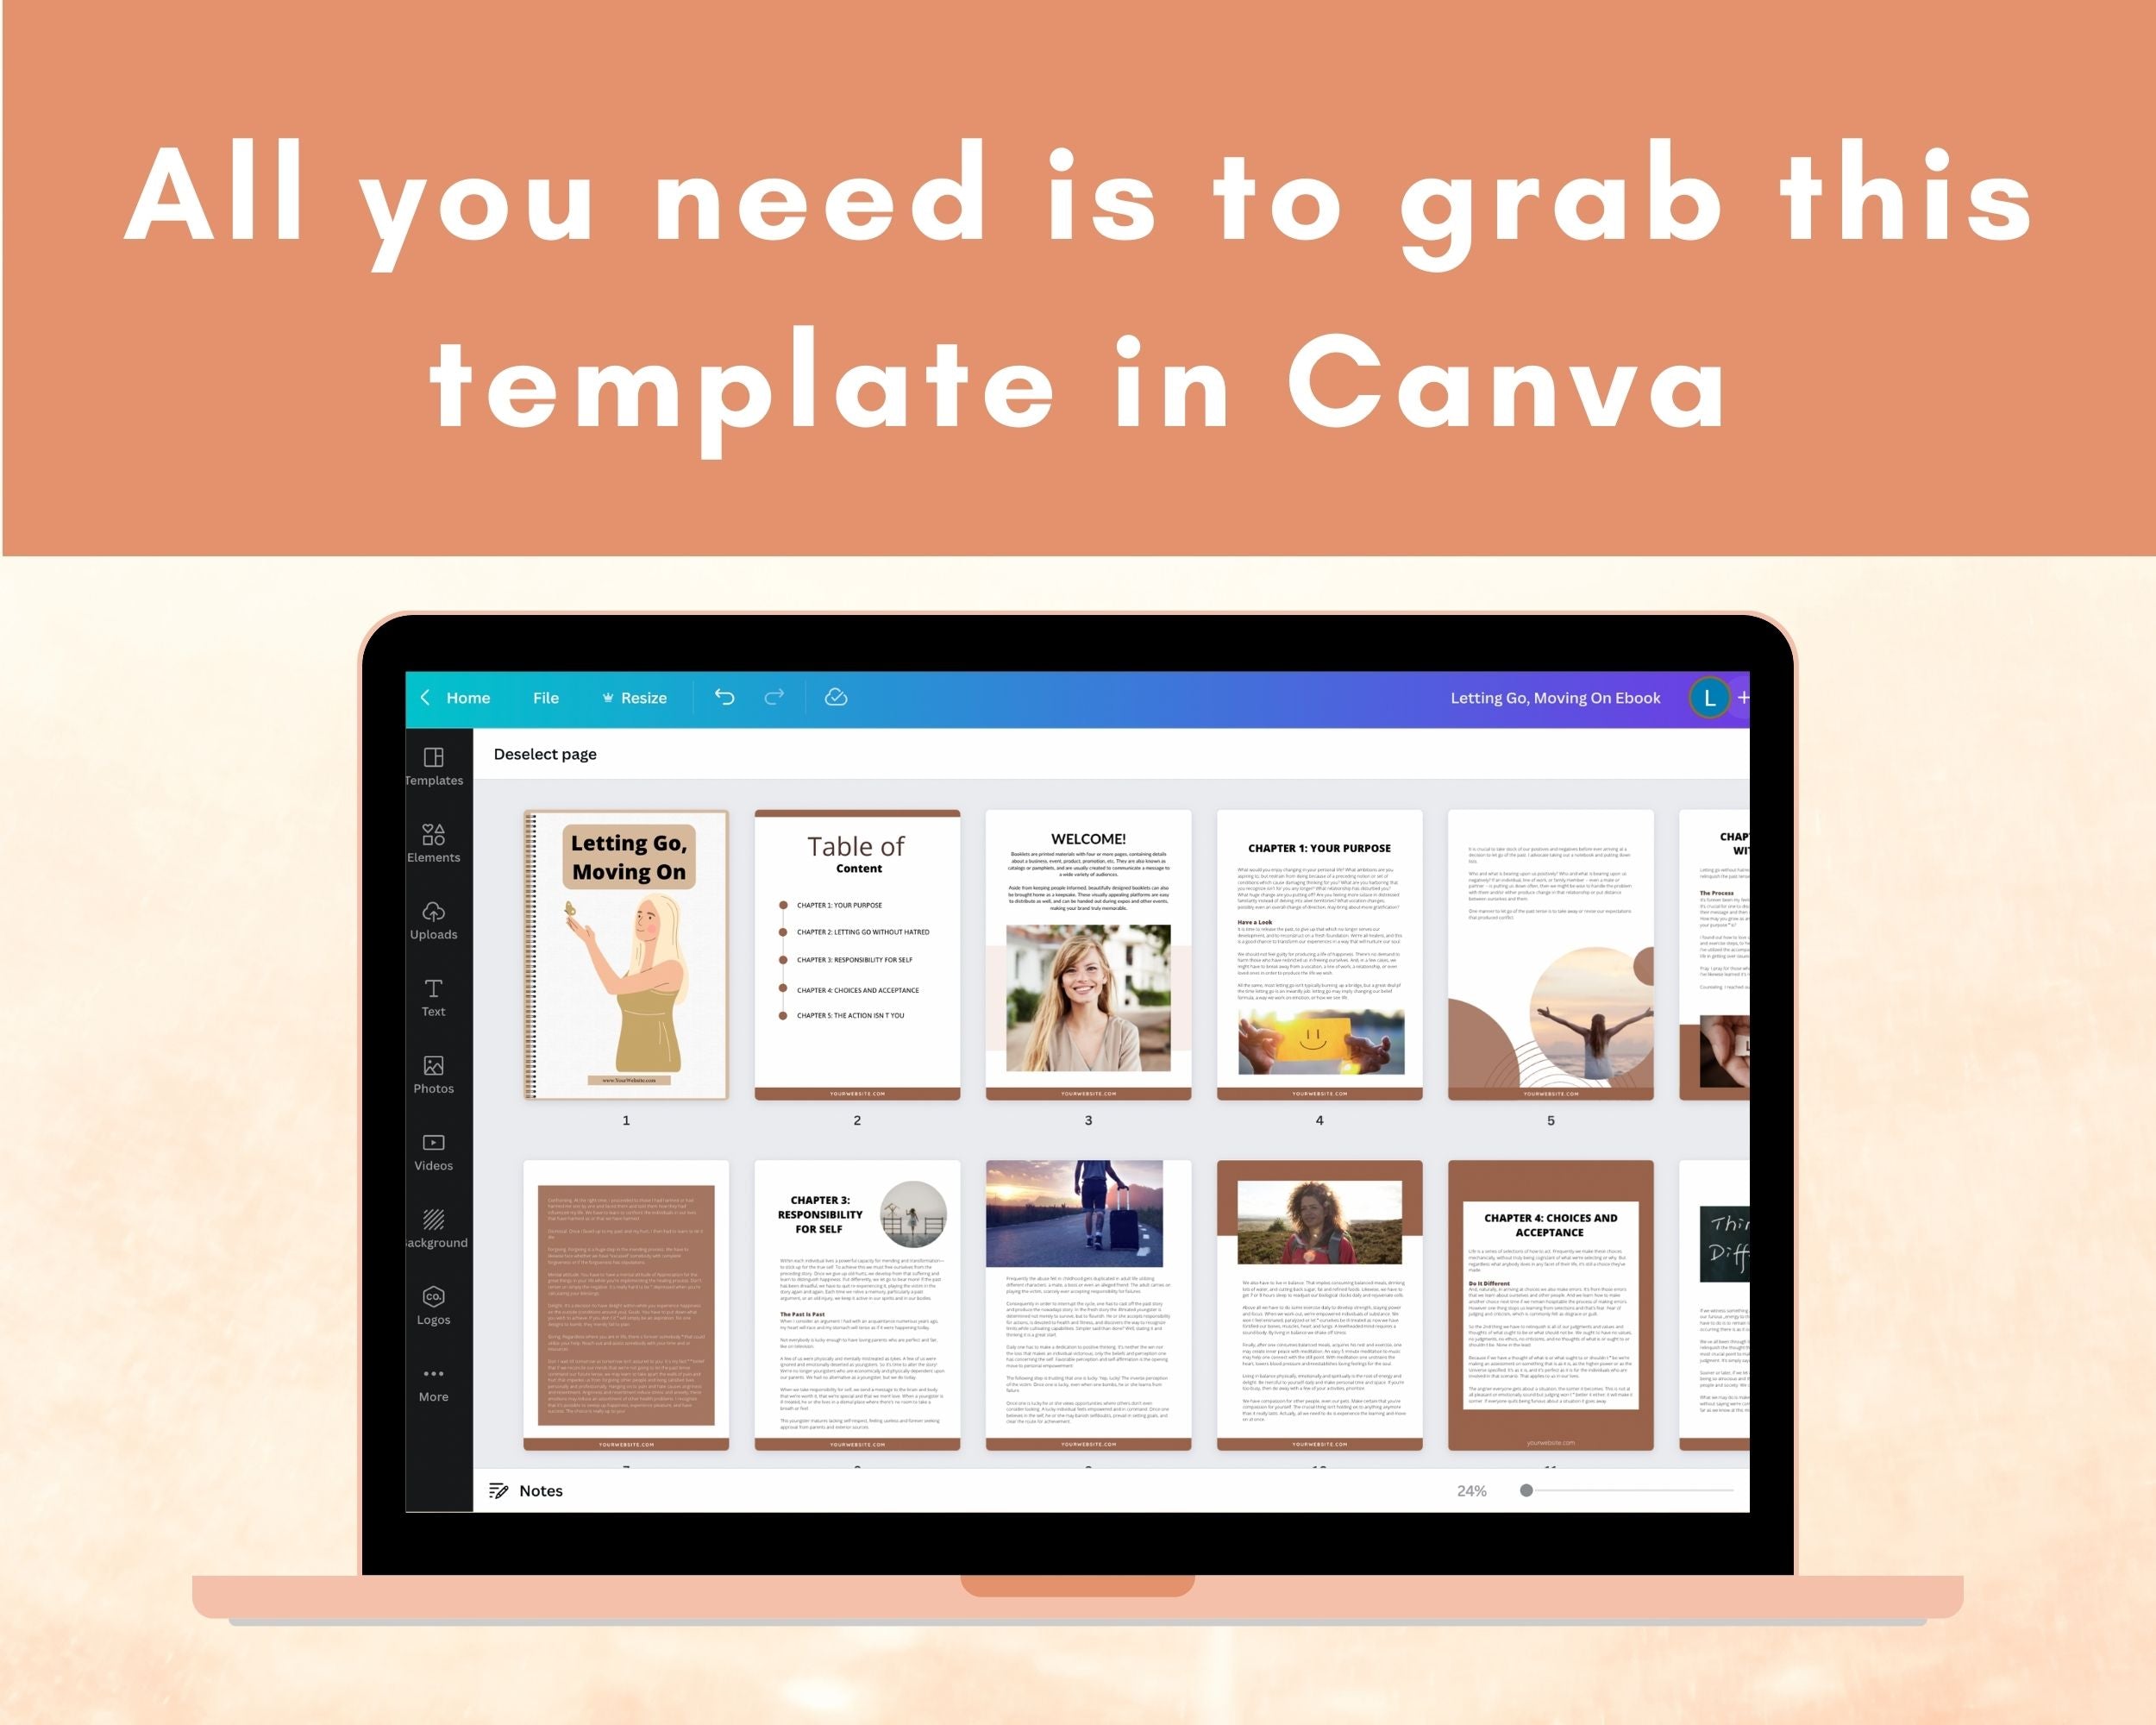 Editable Letting Go, Moving On Mini Ebook | Done-for-You Ebook in Canva | Rebrandable and Resizable Canva Template